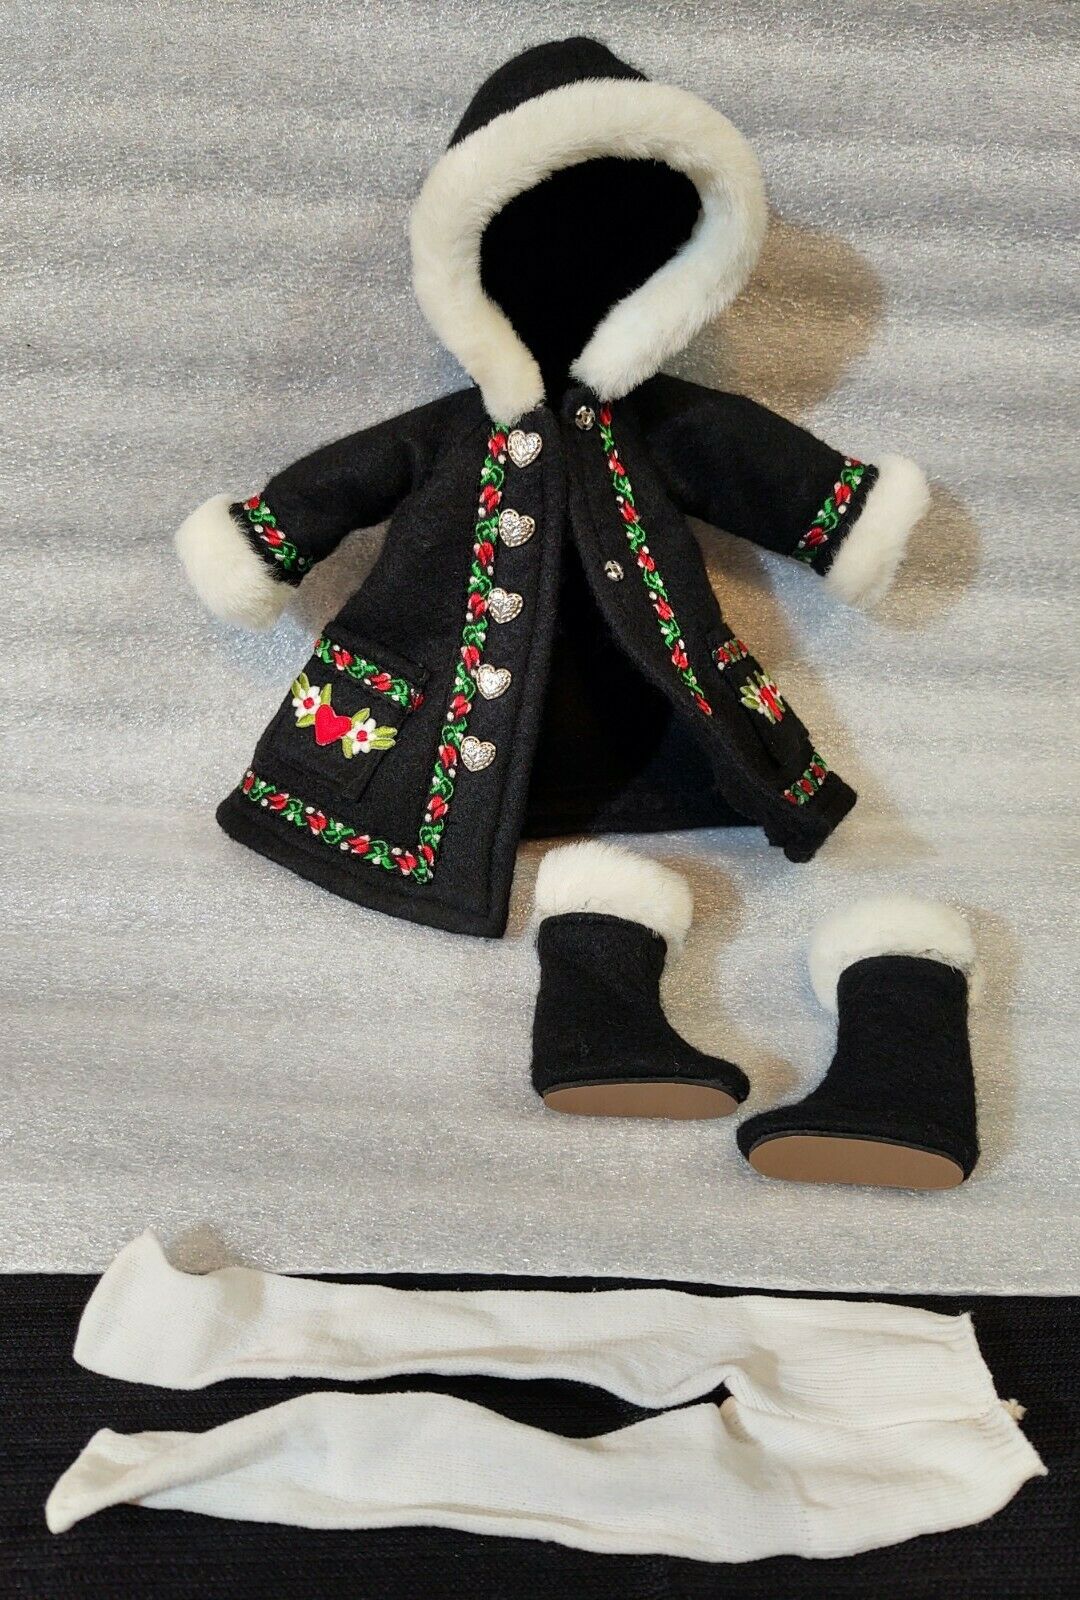 Tonner Betsy Mccall Swiss Miss 14" Doll Outfit Vhtf Jacket/coat, Tights & Boots!